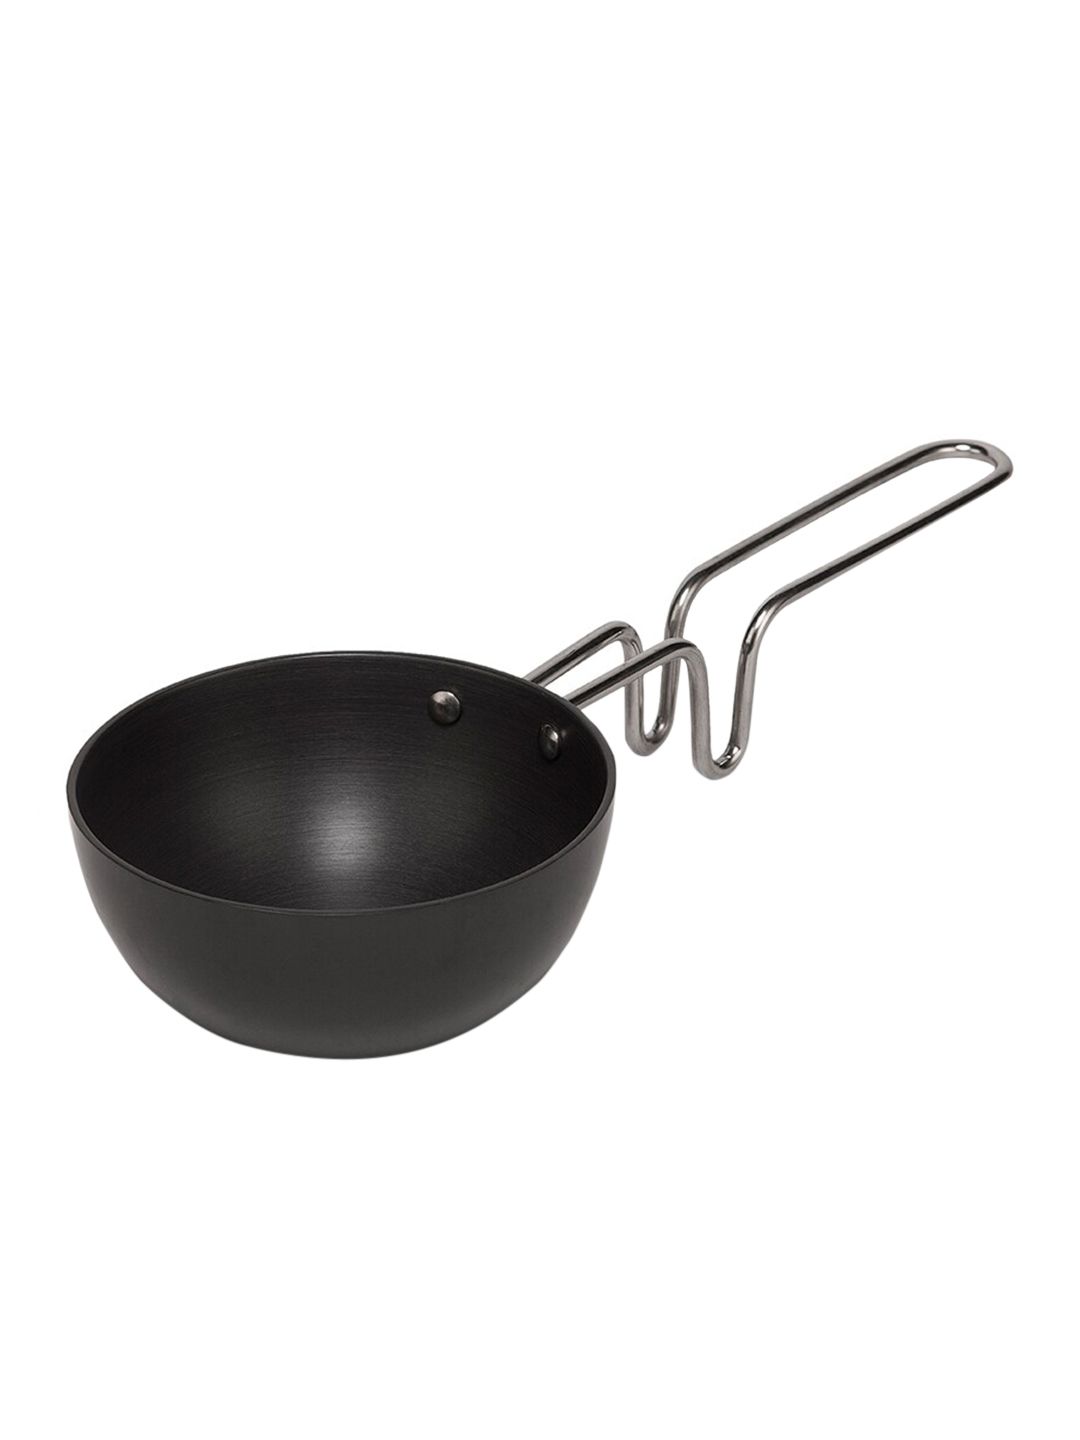 Wonderchef Black Solid Hard Anodized Tadka Pan Price in India